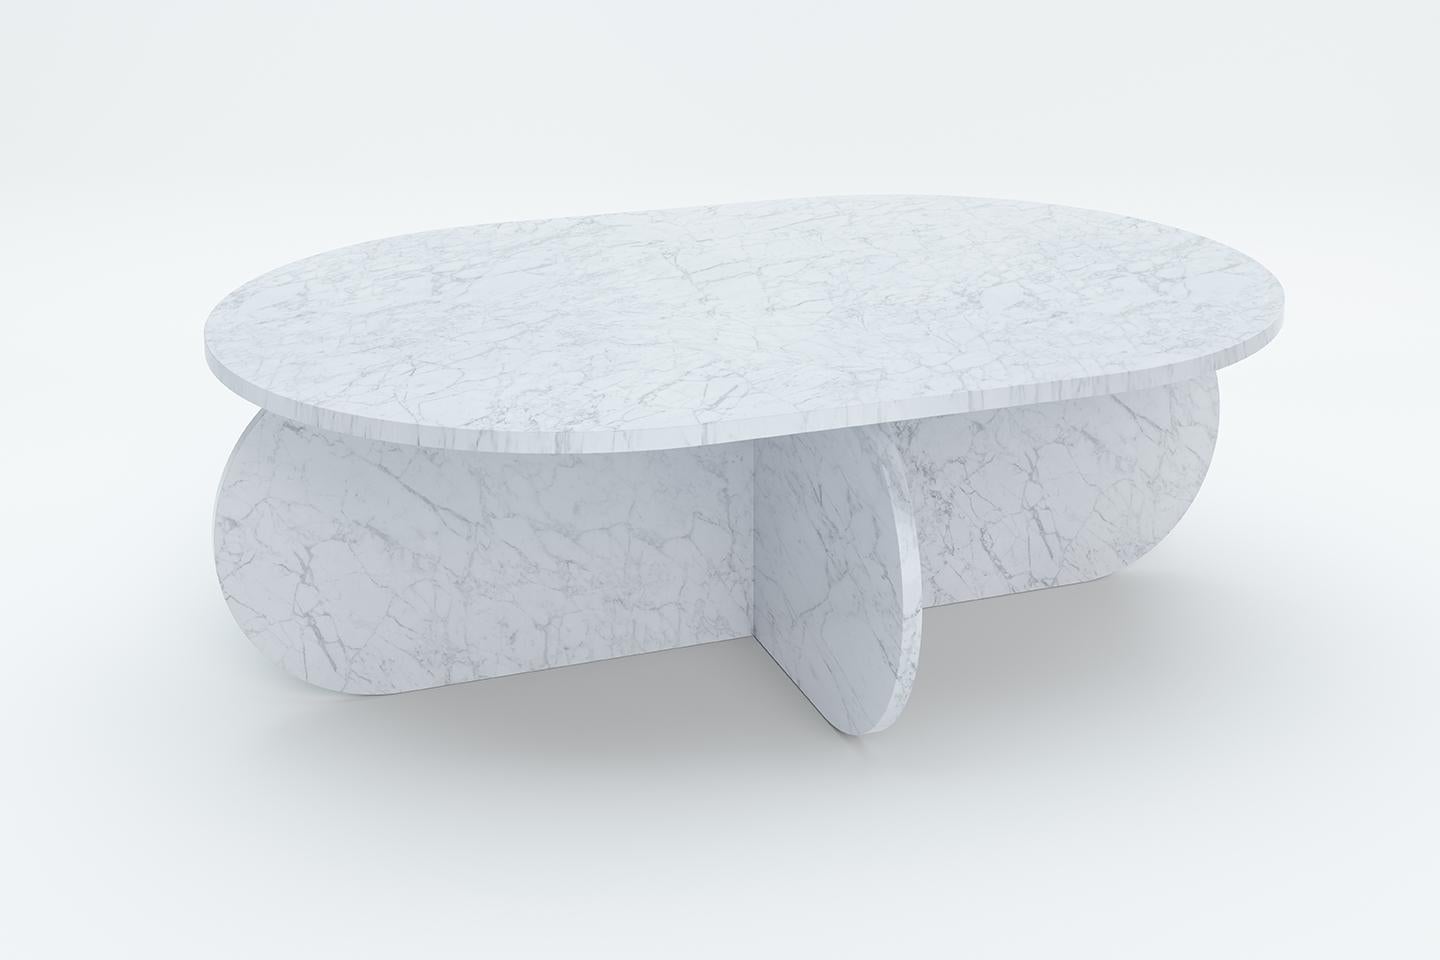 Nor Oblong 120 Marble by Sebastian Scherer
Dimensions: D120 x W80 x H40 cm
Materials: Marble
Also Available: Marble (matt): Carrara Bianco (white) / Wild Forest (green) / Marron Emperador (brown) / Nero Marquina (black).
Custom heights + 50 %,